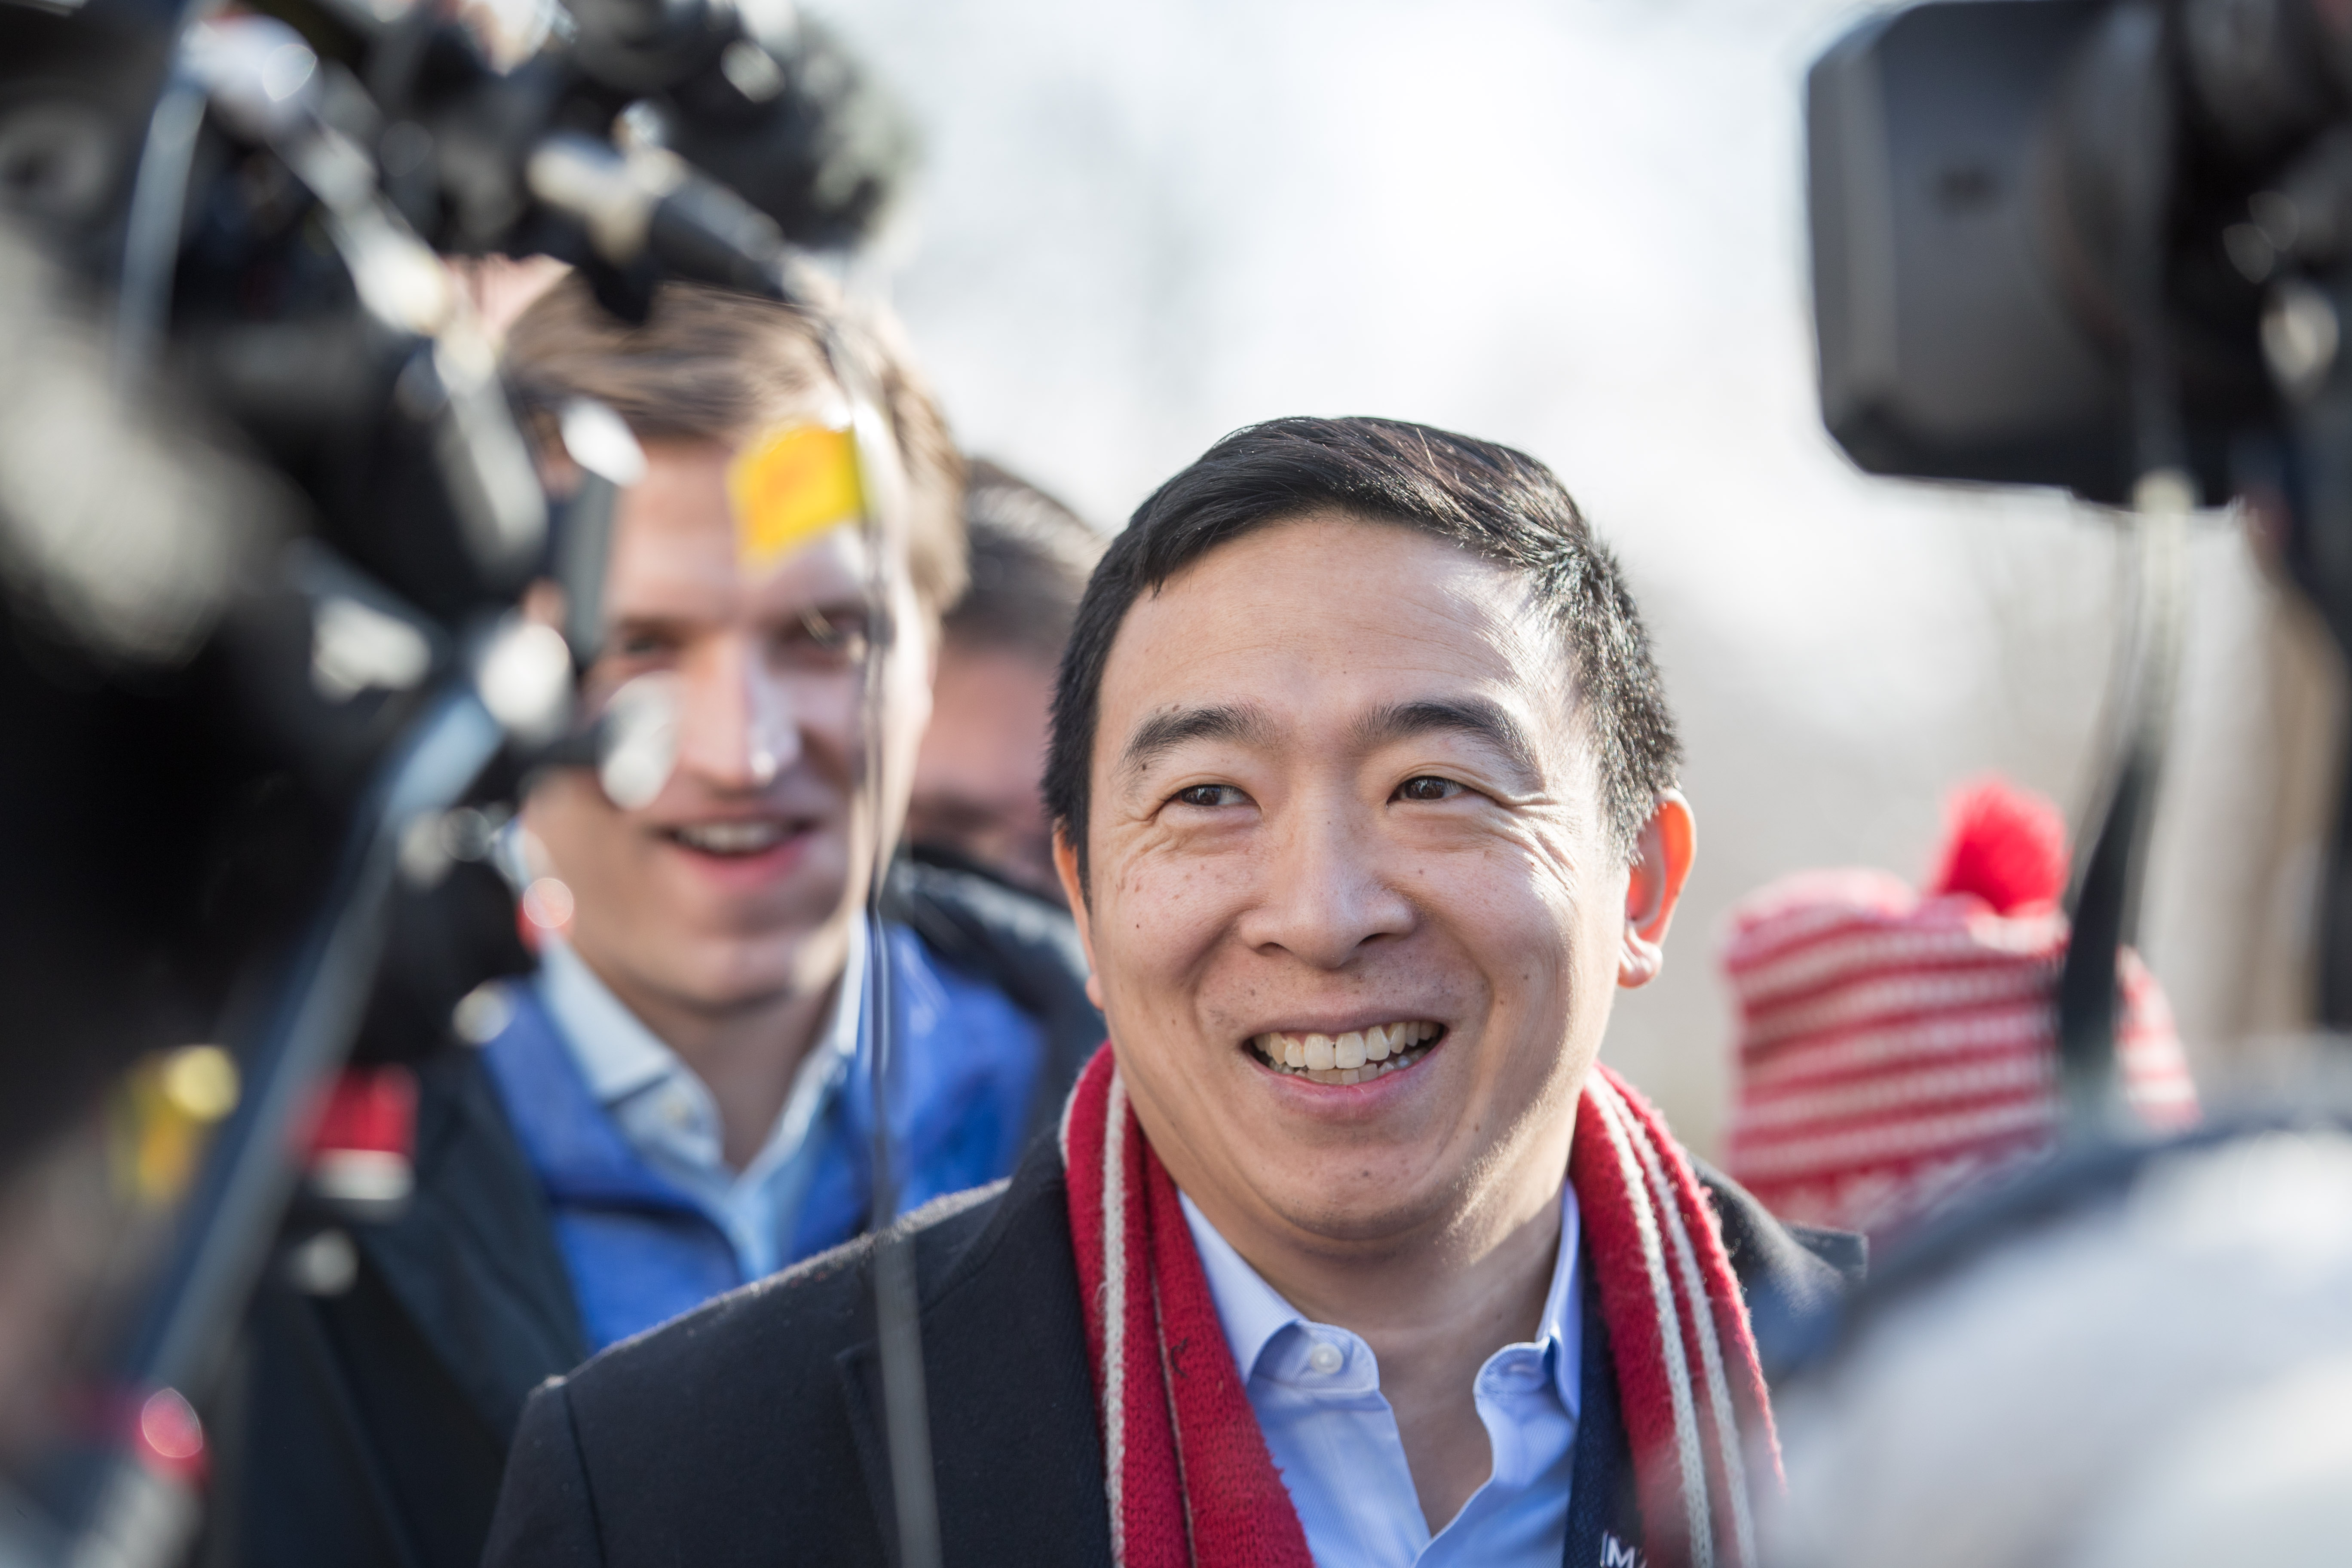 HOPKINTON, NH - FEBRUARY 09: Democratic presidential candidate Andrew Yang is interviewed outside of Hopkinton Town Hall following a campaign event on February 9, 2020 in Hopkinton, New Hampshire. The first in the nation primary is on Tuesday, February 11. (Photo by Scott Eisen/Getty Images)